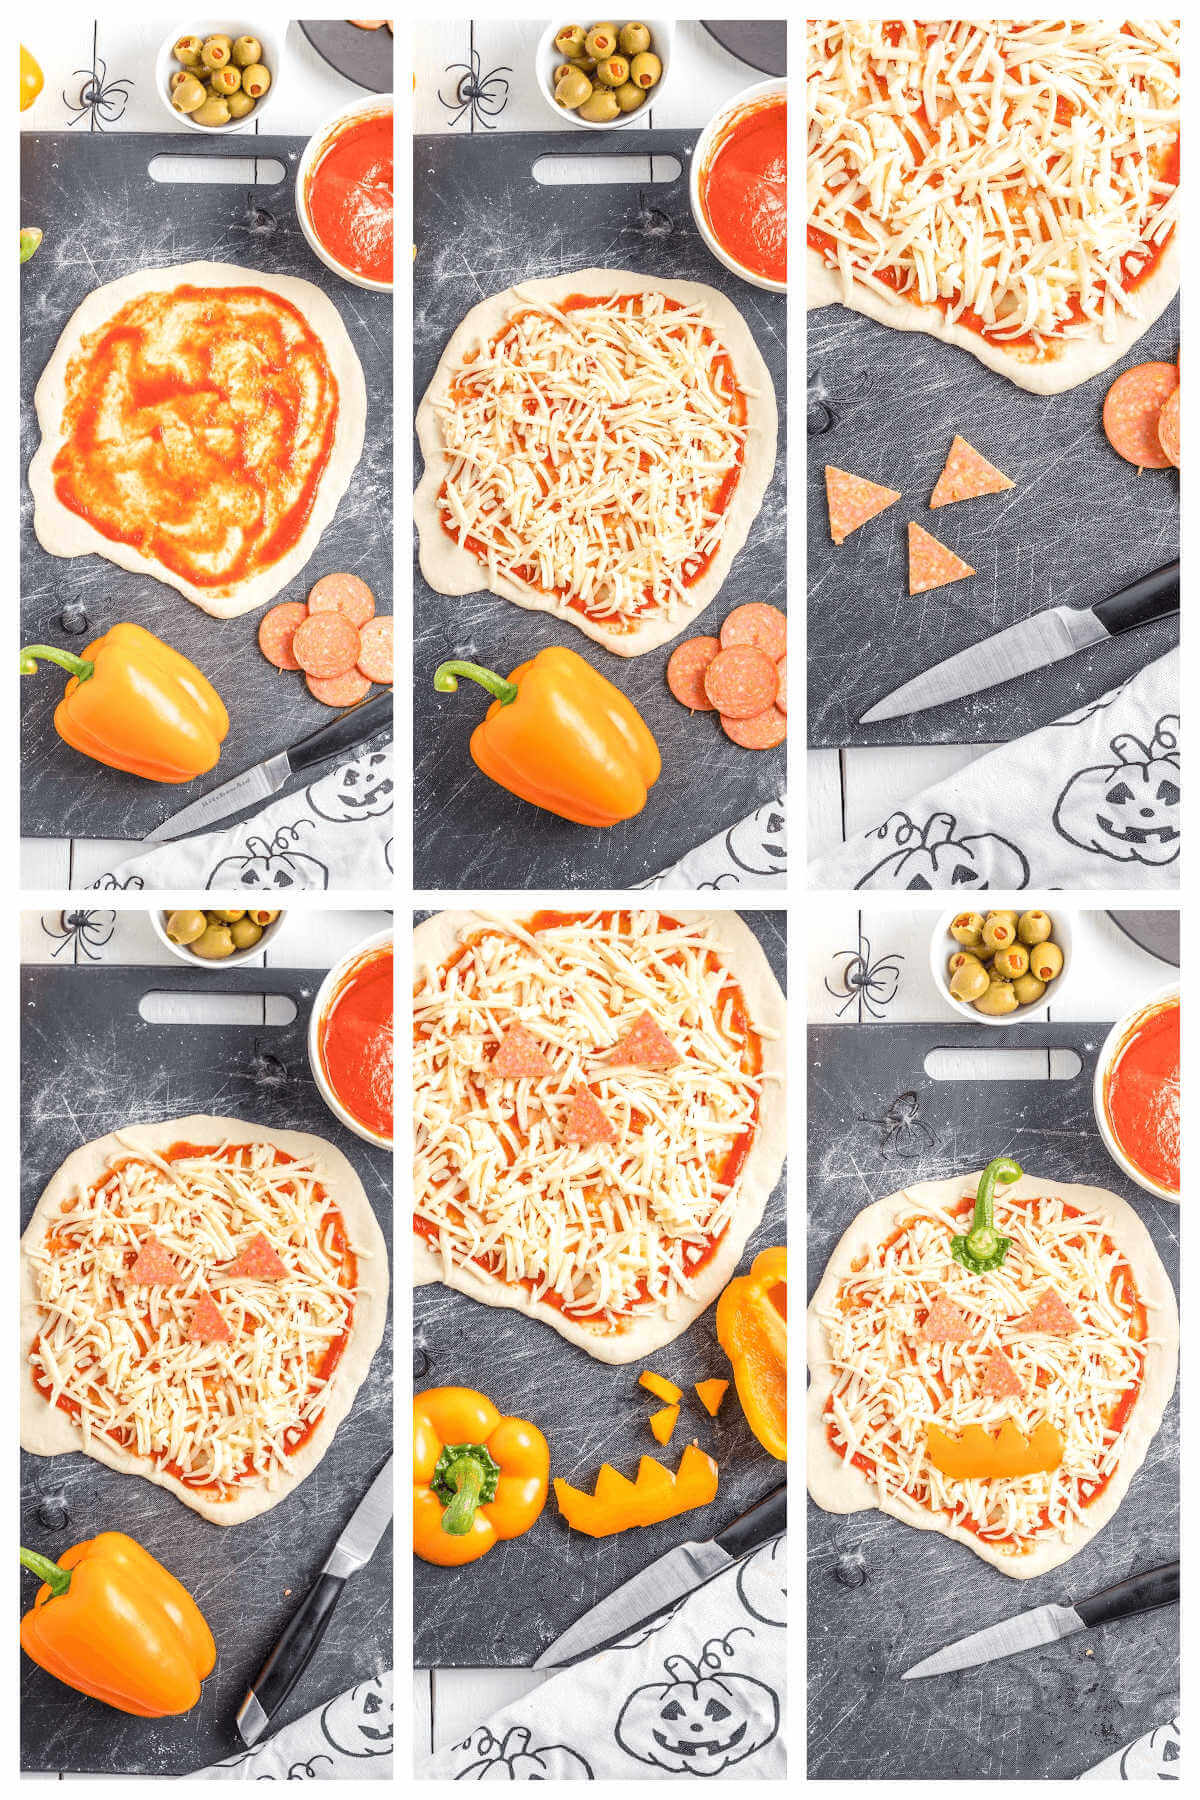 Step by Step instructions on how to make the Jack-O-Lantern Pizza.